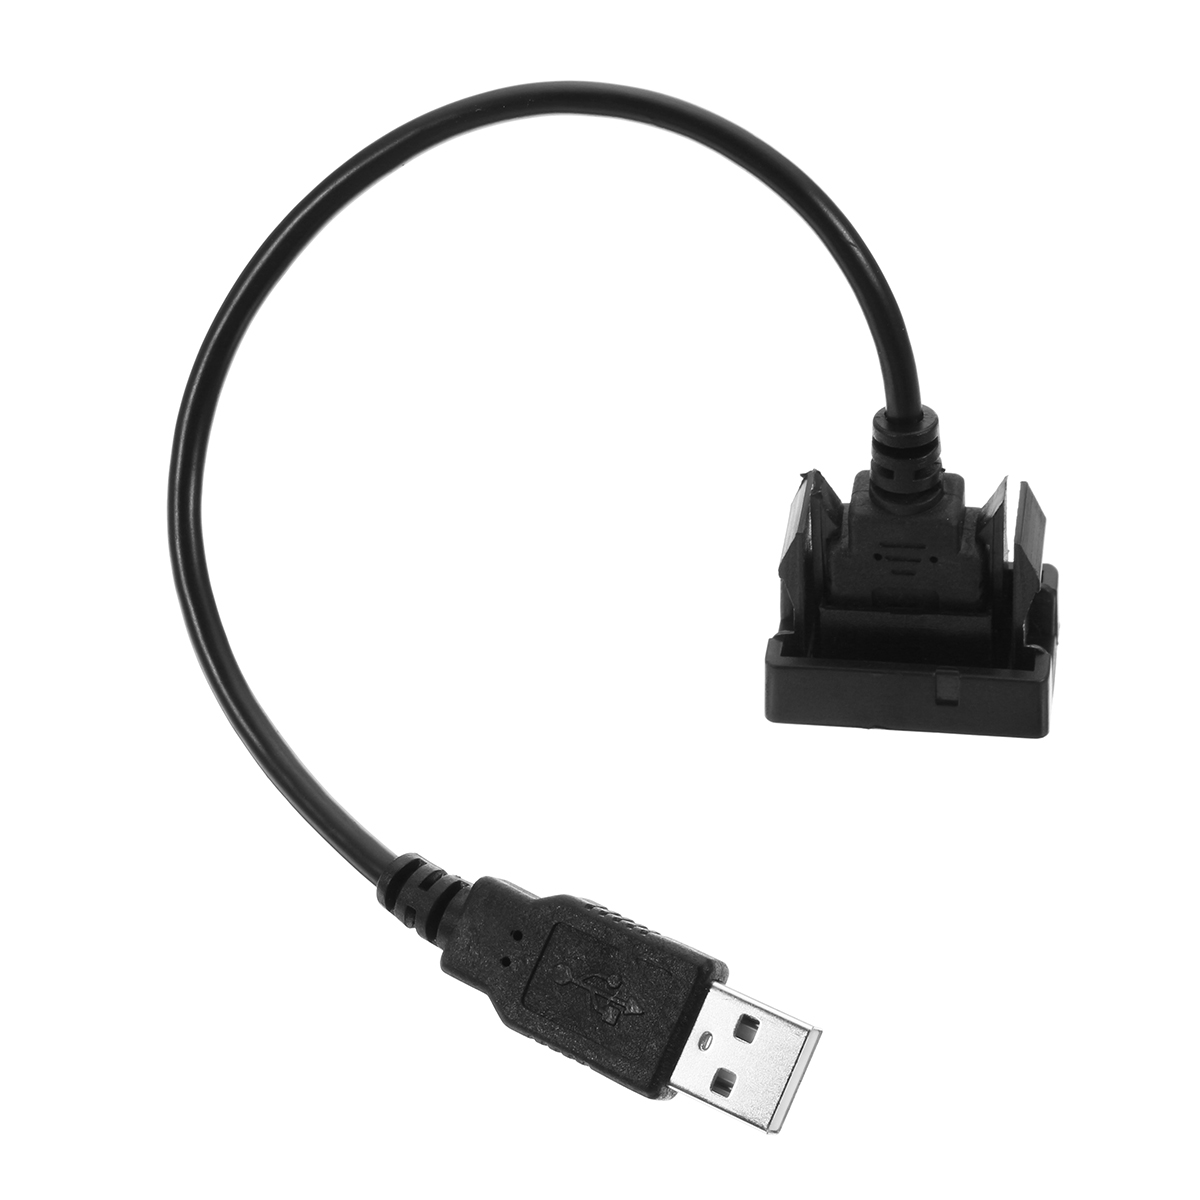 Car USB 2.0 Extension Lead Cable Auto Dashboard Flush Mount Interface Adapter Cord for Toyota